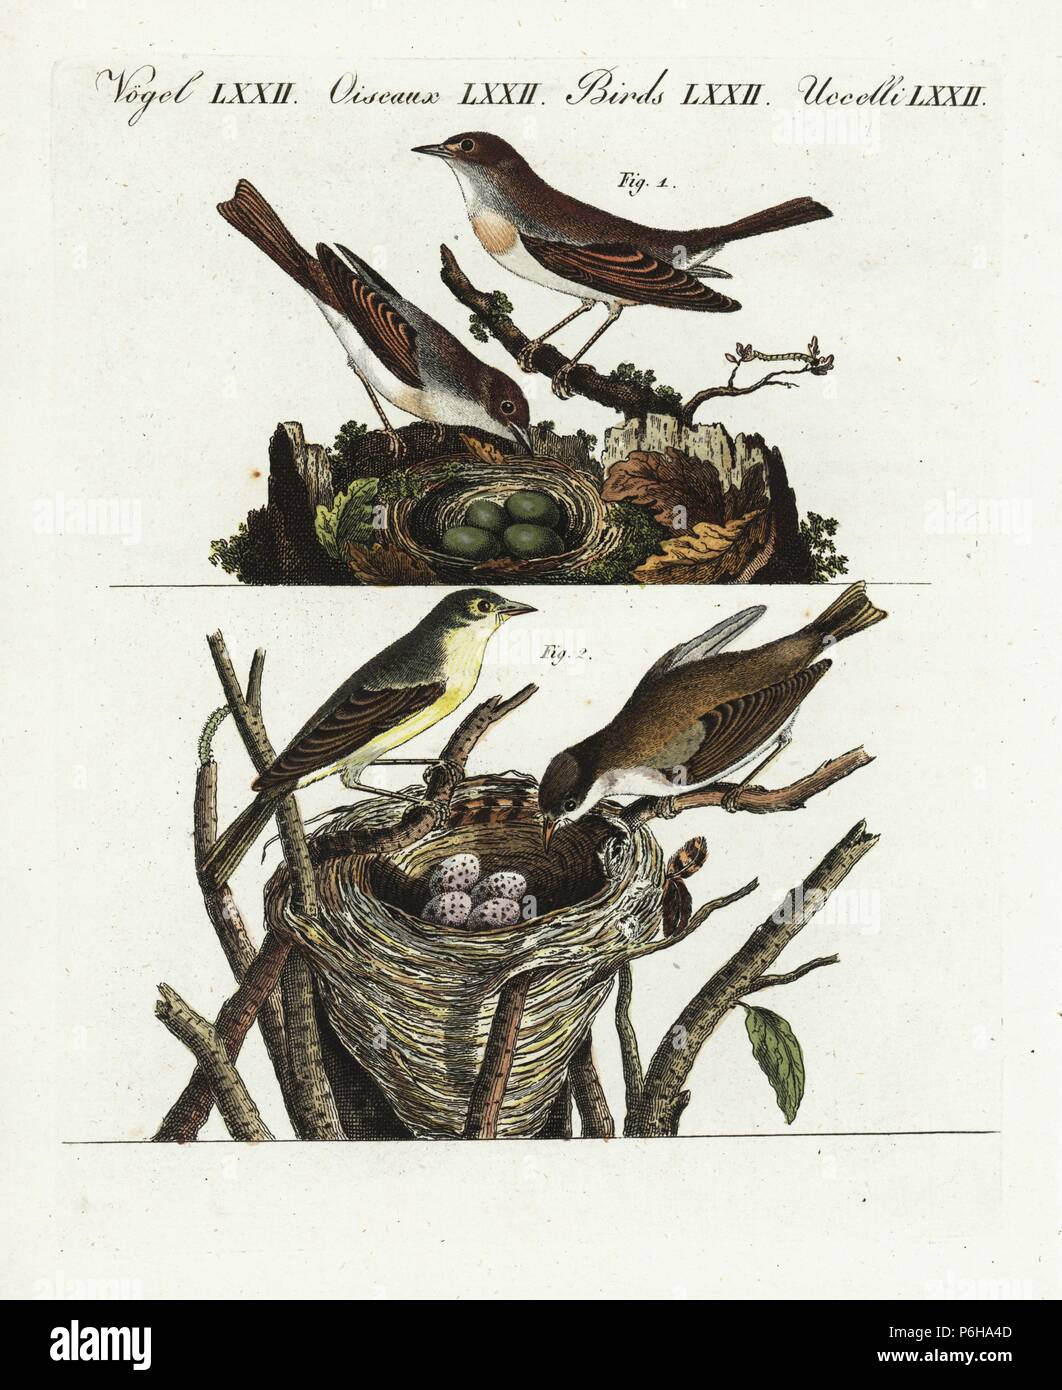 Common nightingale, Luscinia megarhynchos, and chiffchaff, Phylloscopus collybita, with nest and eggs. Handcoloured copperplate engraving from Bertuch's 'Bilderbuch fur Kinder' (Picture Book for Children), Weimar, 1805. Friedrich Johann Bertuch (1747-1822) was a German publisher and man of arts most famous for his 12-volume encyclopedia for children illustrated with 1,200 engraved plates on natural history, science, costume, mythology, etc., published from 1790-1830. Stock Photo